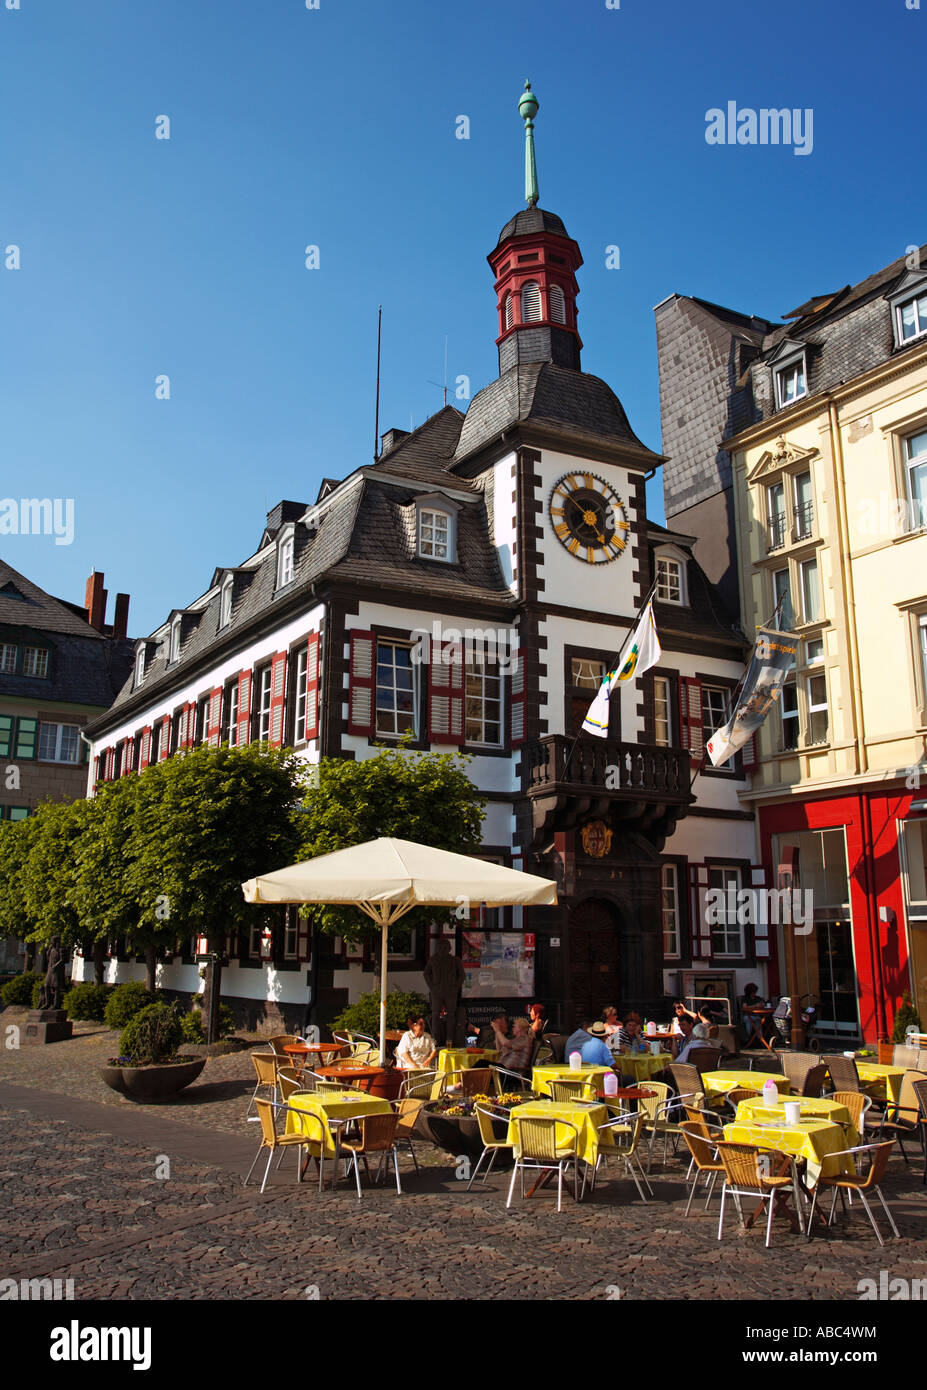 Old town hall with pavement cafe in Mayen, Germany Stock Photo